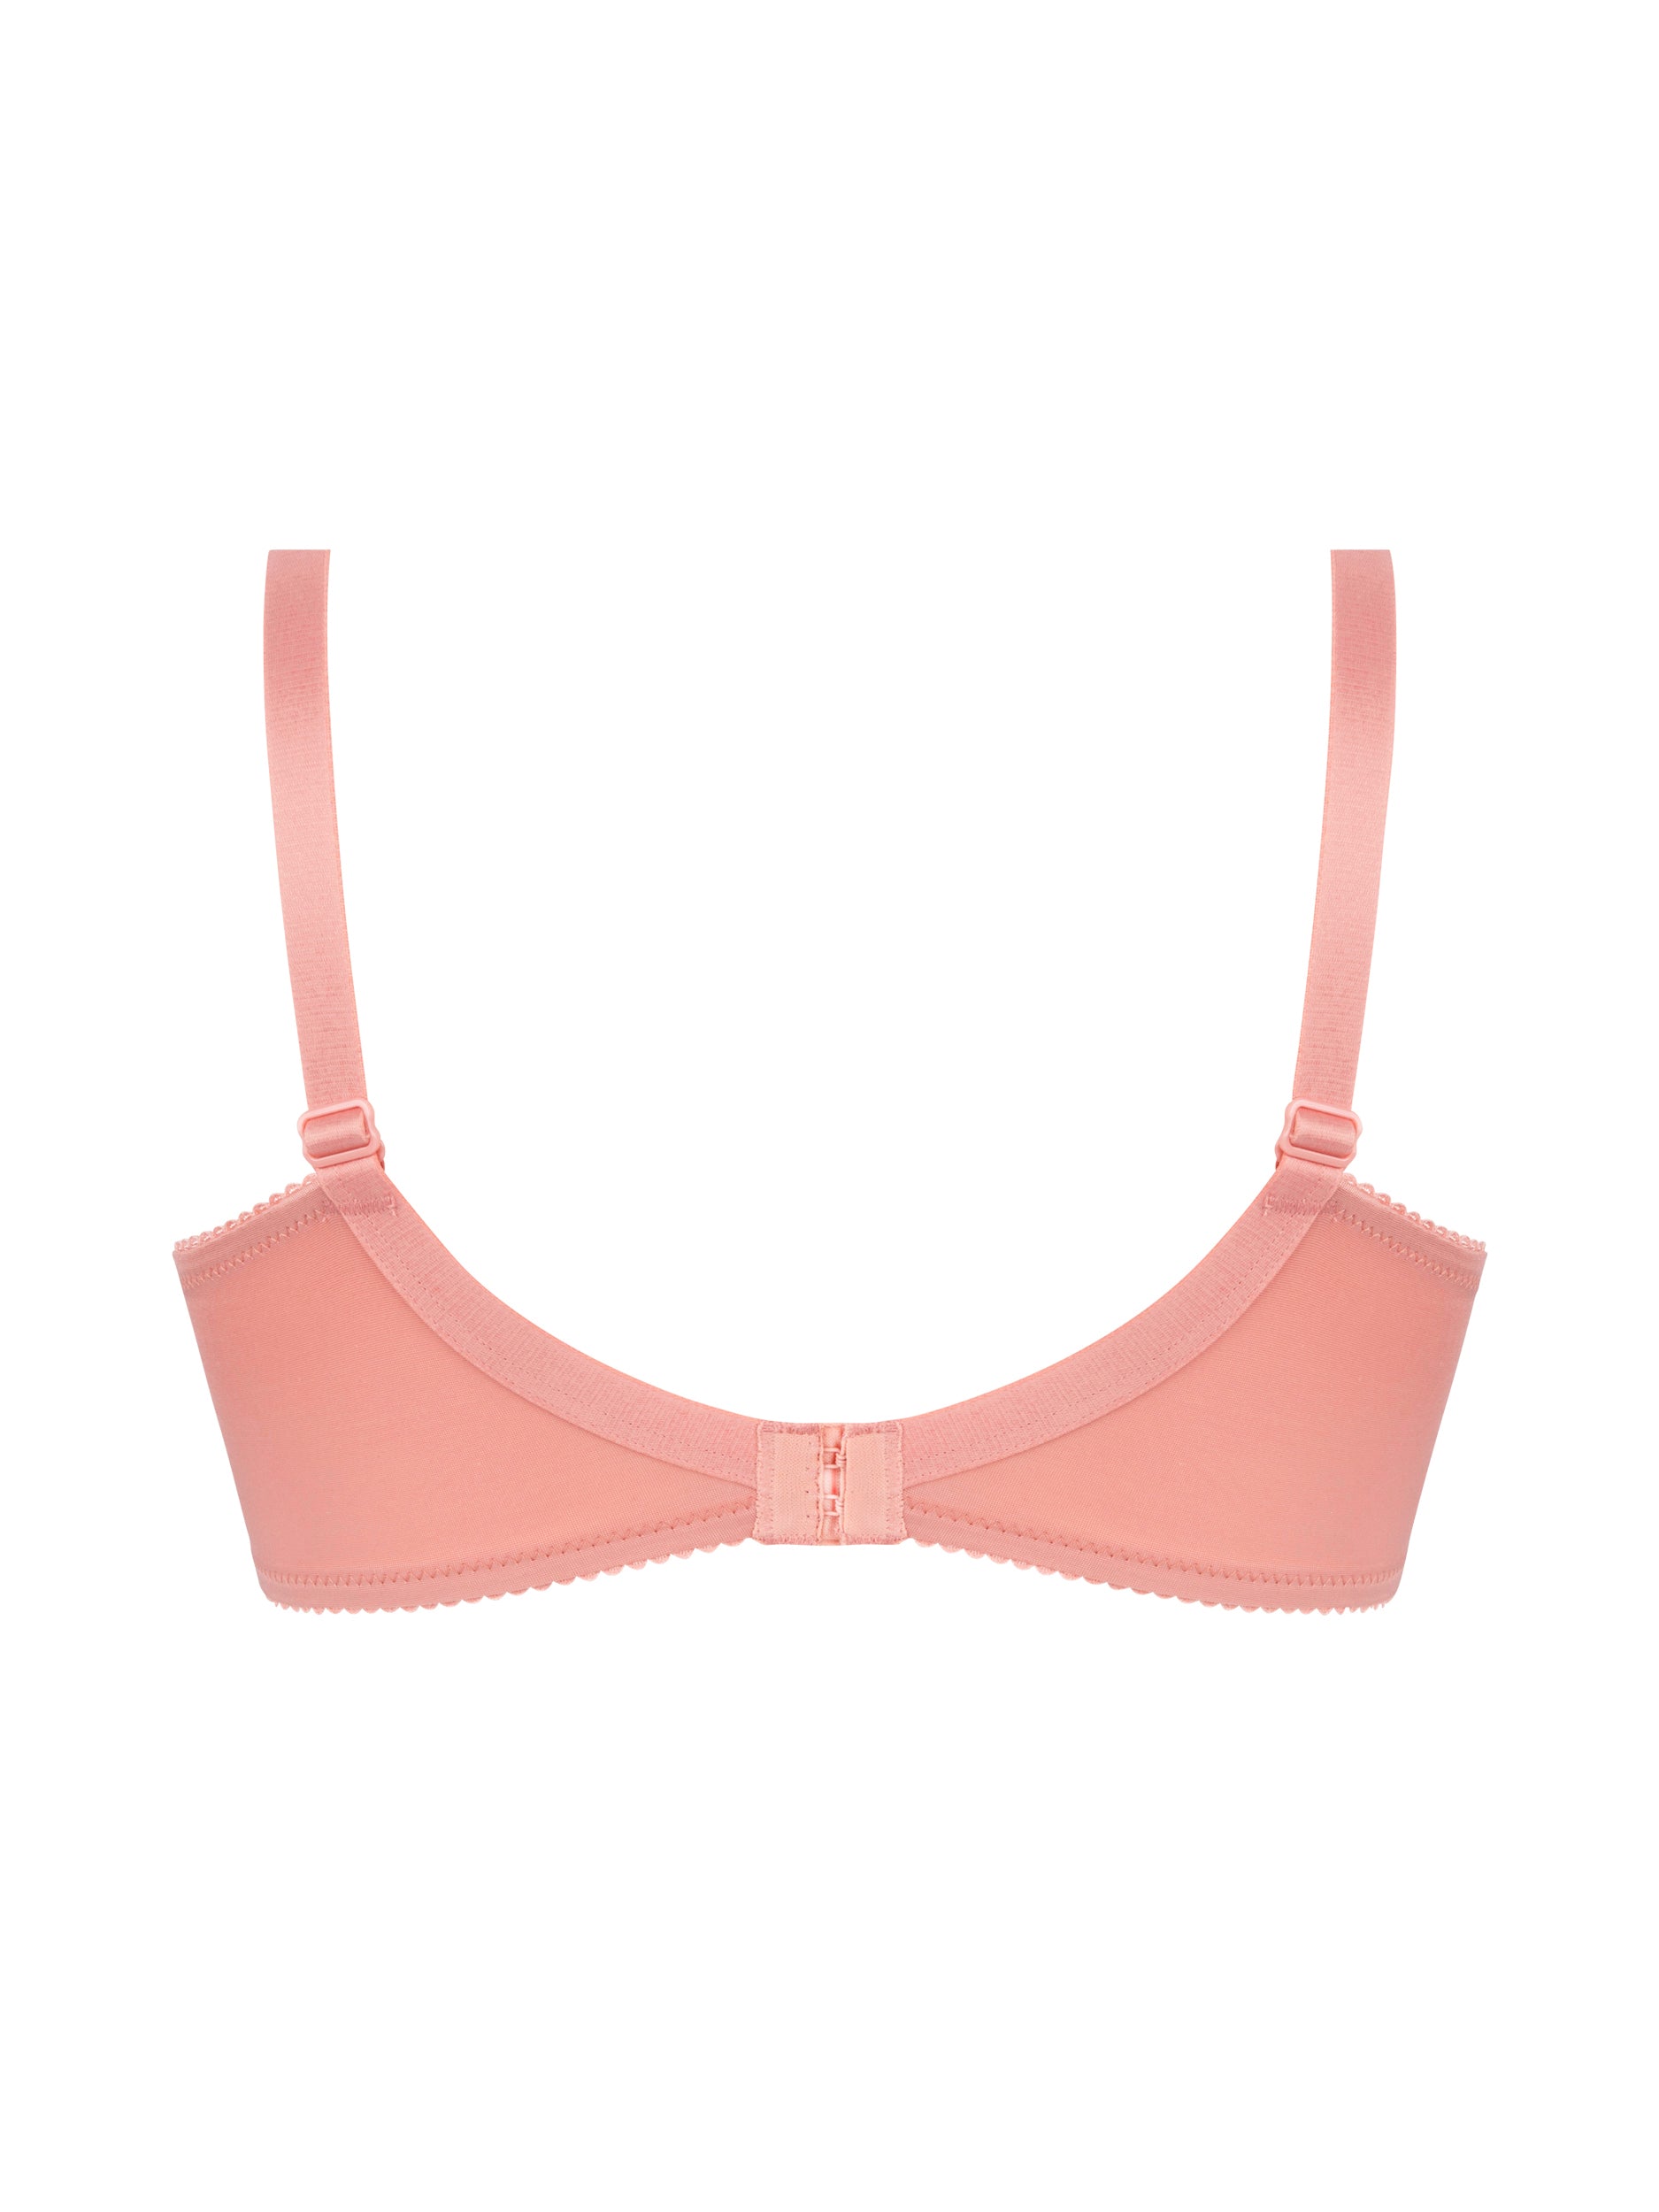 Elegant, sexy and supports you - Satin Candy Bra Boutique